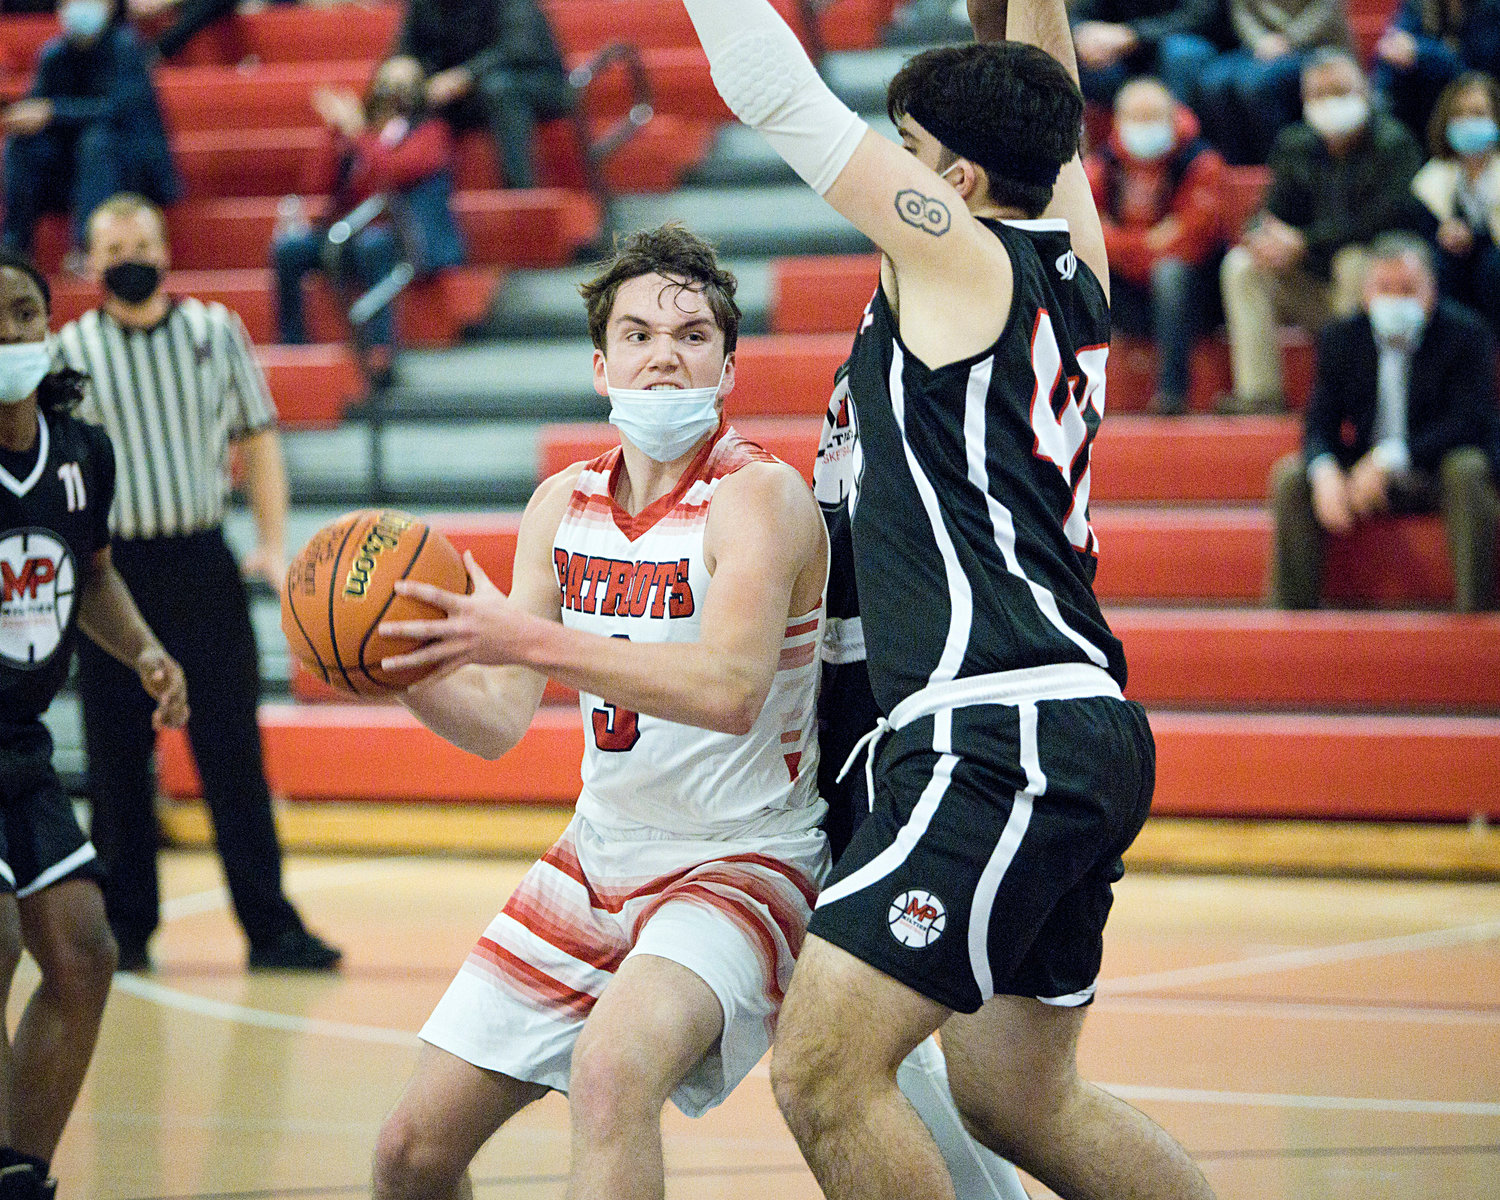 Jack Downing pushes past a Mt. Pleasant opponent during Friday's game.